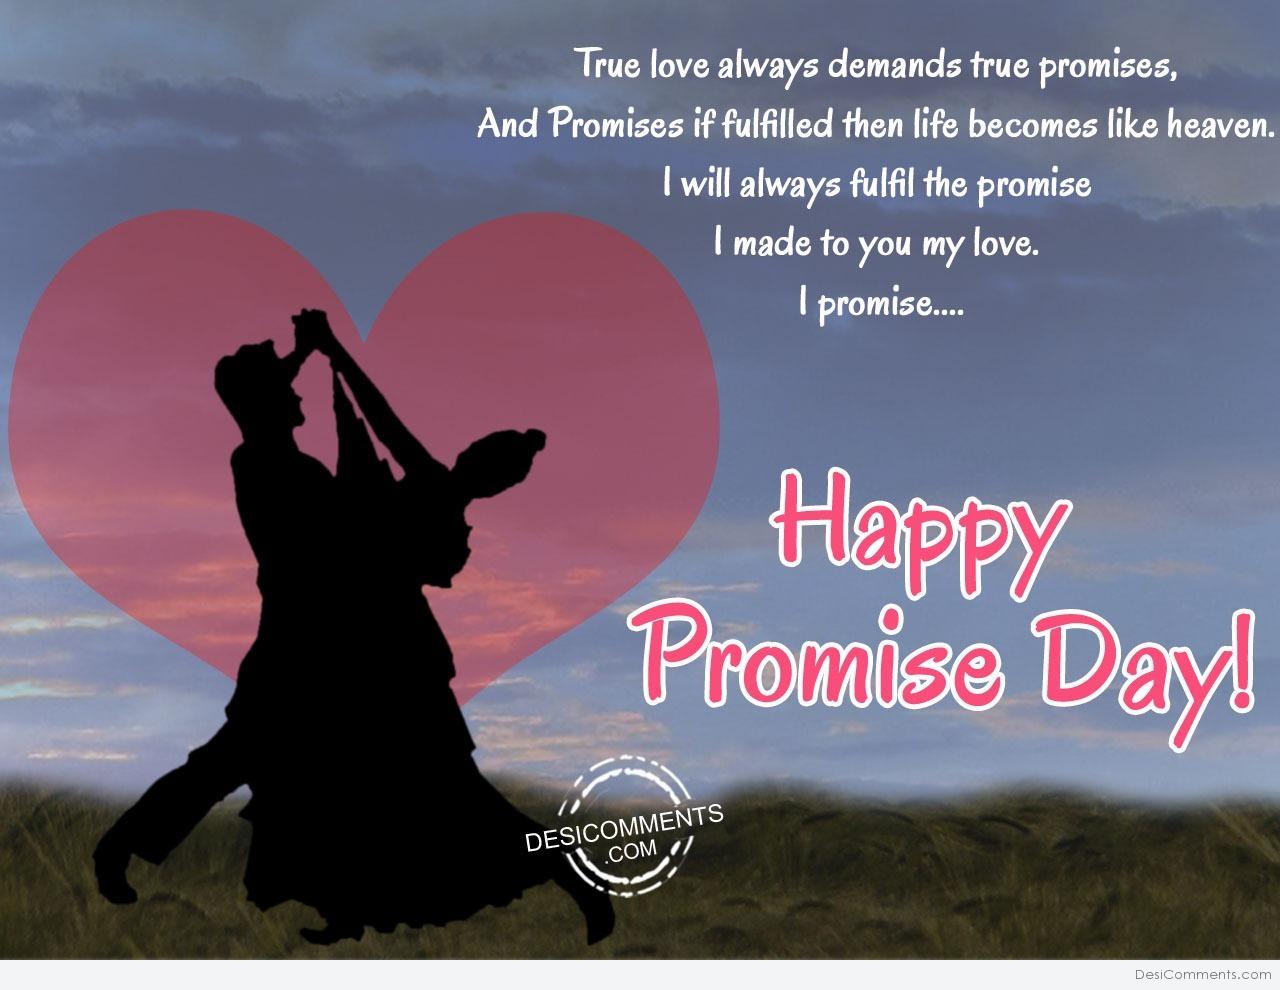 True love always demand,Happy promise day - DesiComments.com